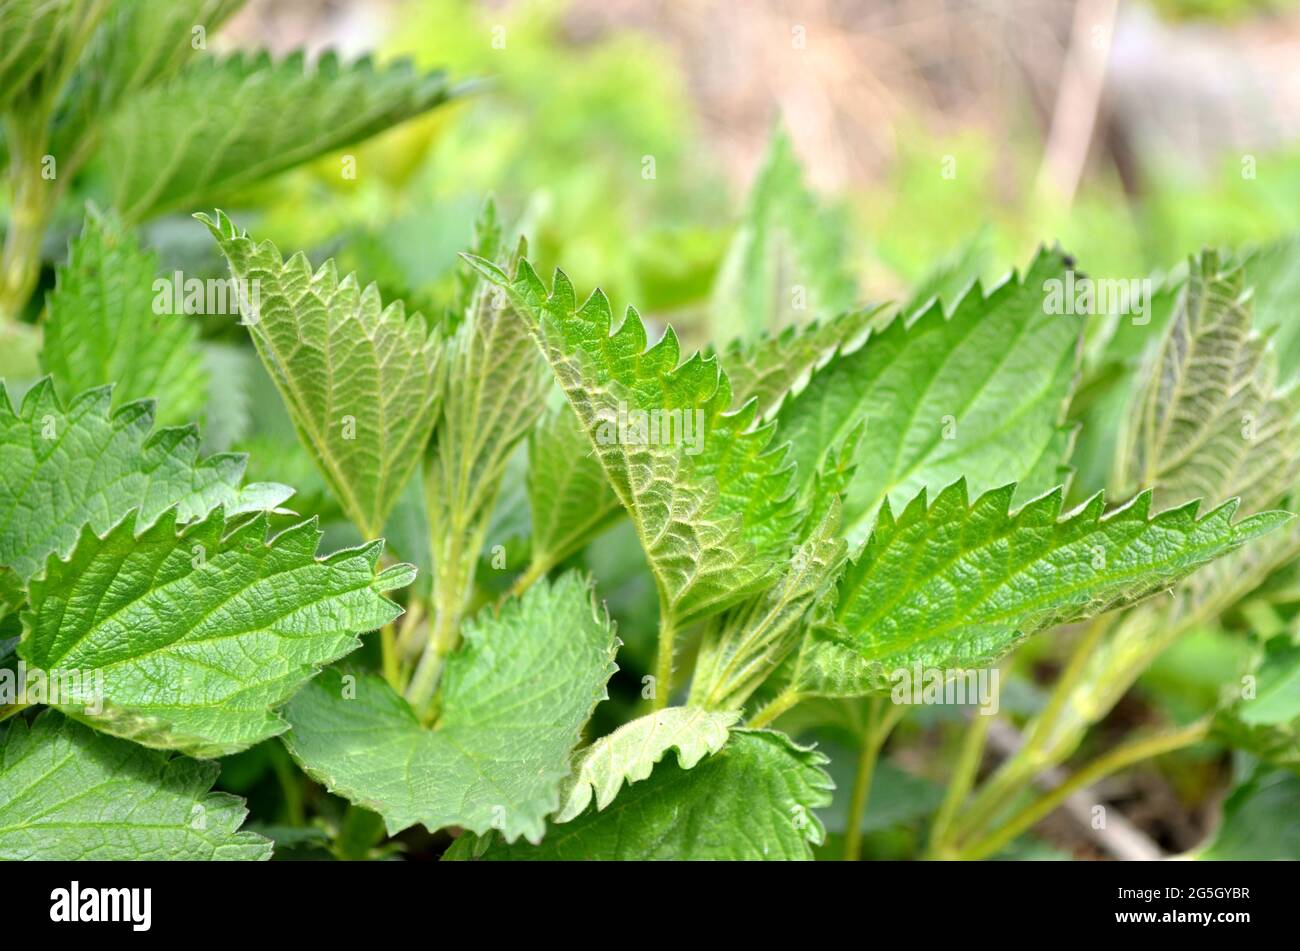 Urtica dioica or common nettle is a herbaceous perennial medicinal plant in the family Urticaceae growing outdoors in the garden, selective focus. Stock Photo